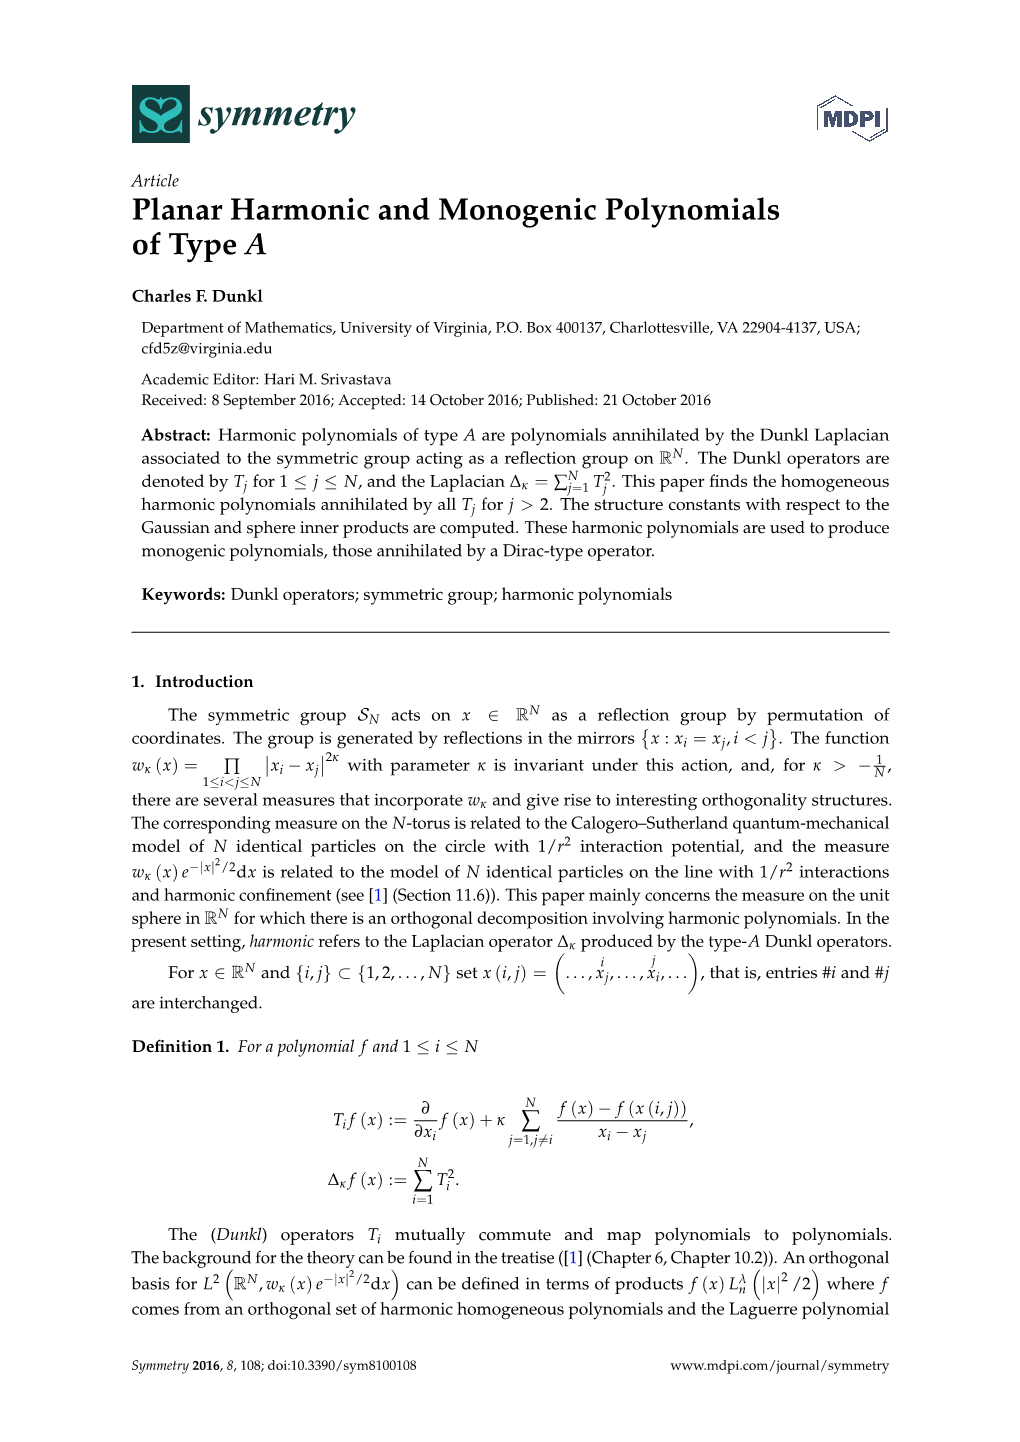 Planar Harmonic and Monogenic Polynomials of Type A